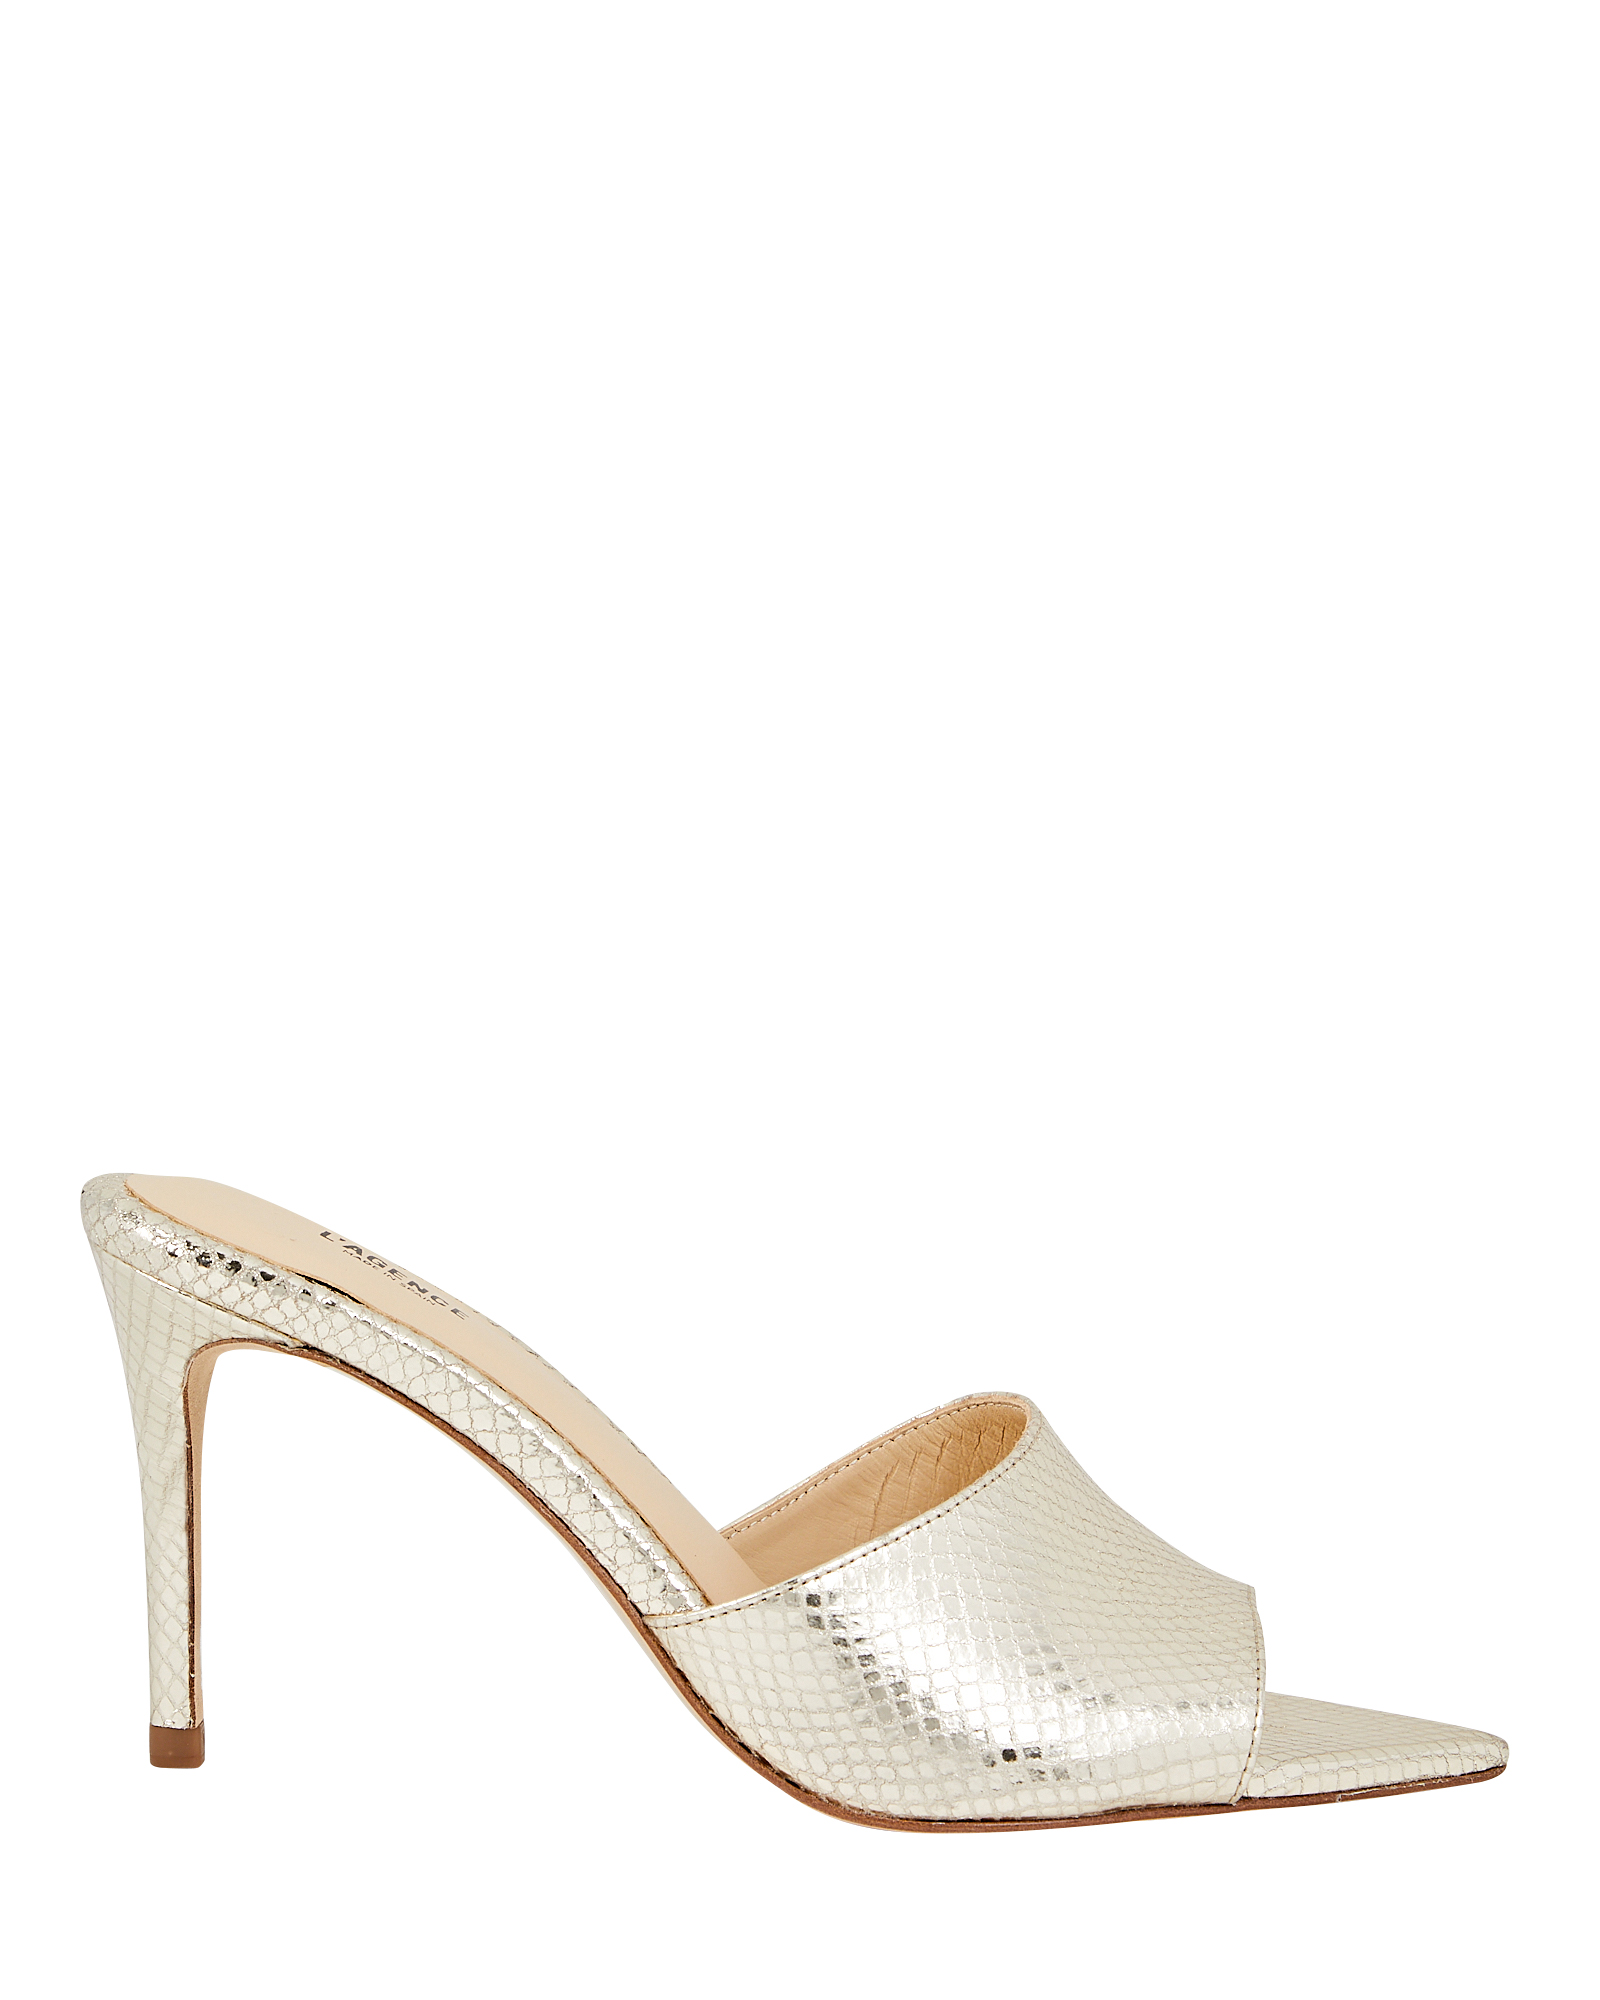 L'Agence Lolita Open Toe Snake Embossed Mules, Gold 38 | INTERMIX